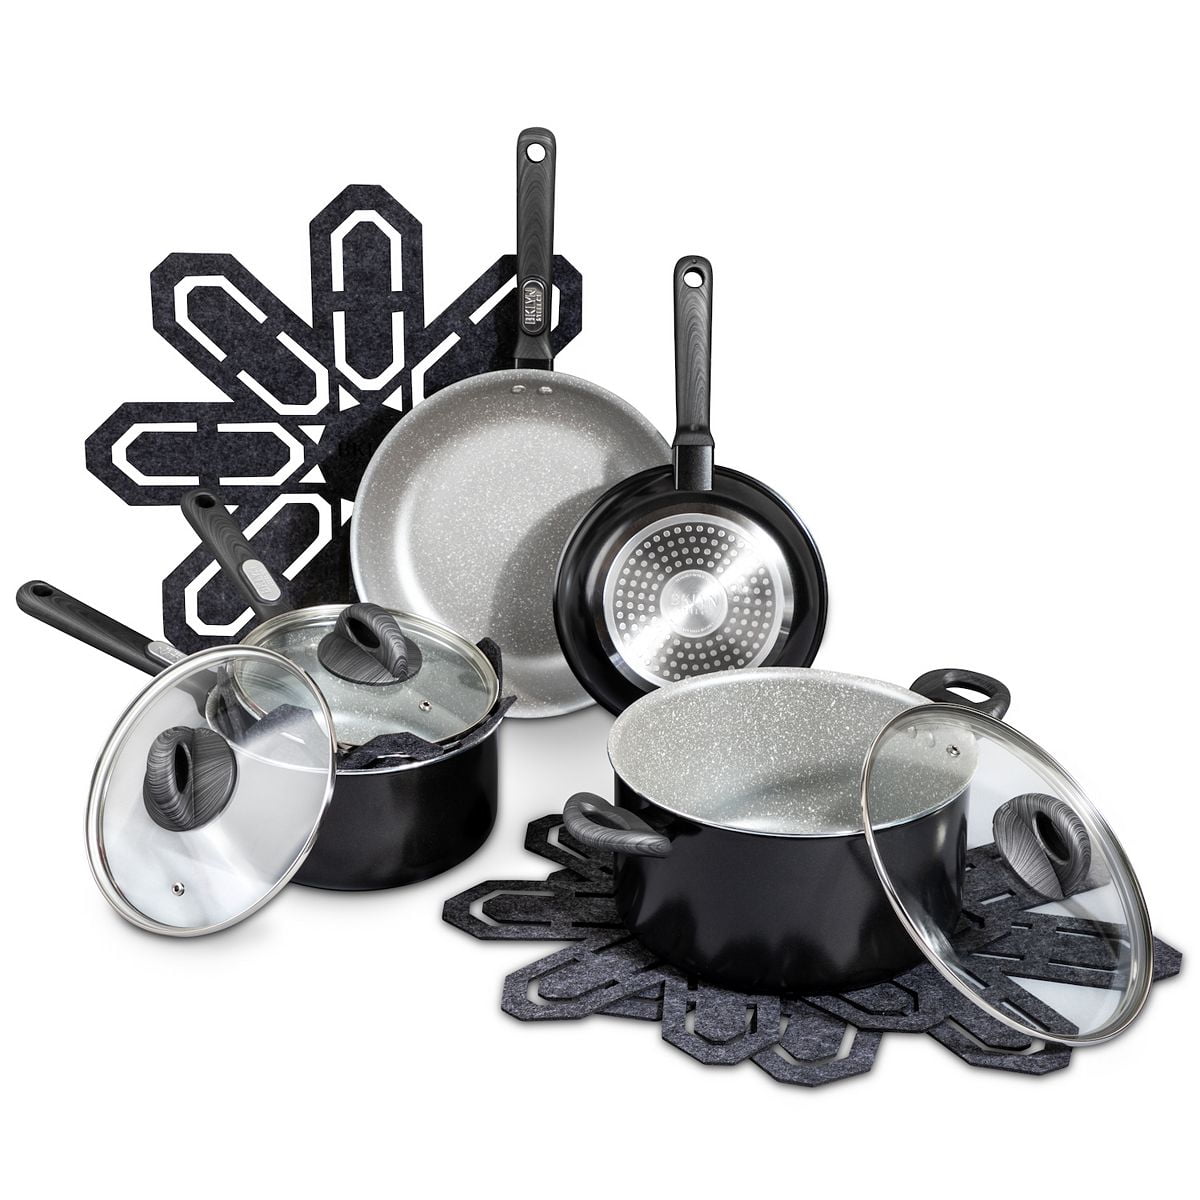 The Clean Store 12 Piece Stainless Steel Cookware Set #420